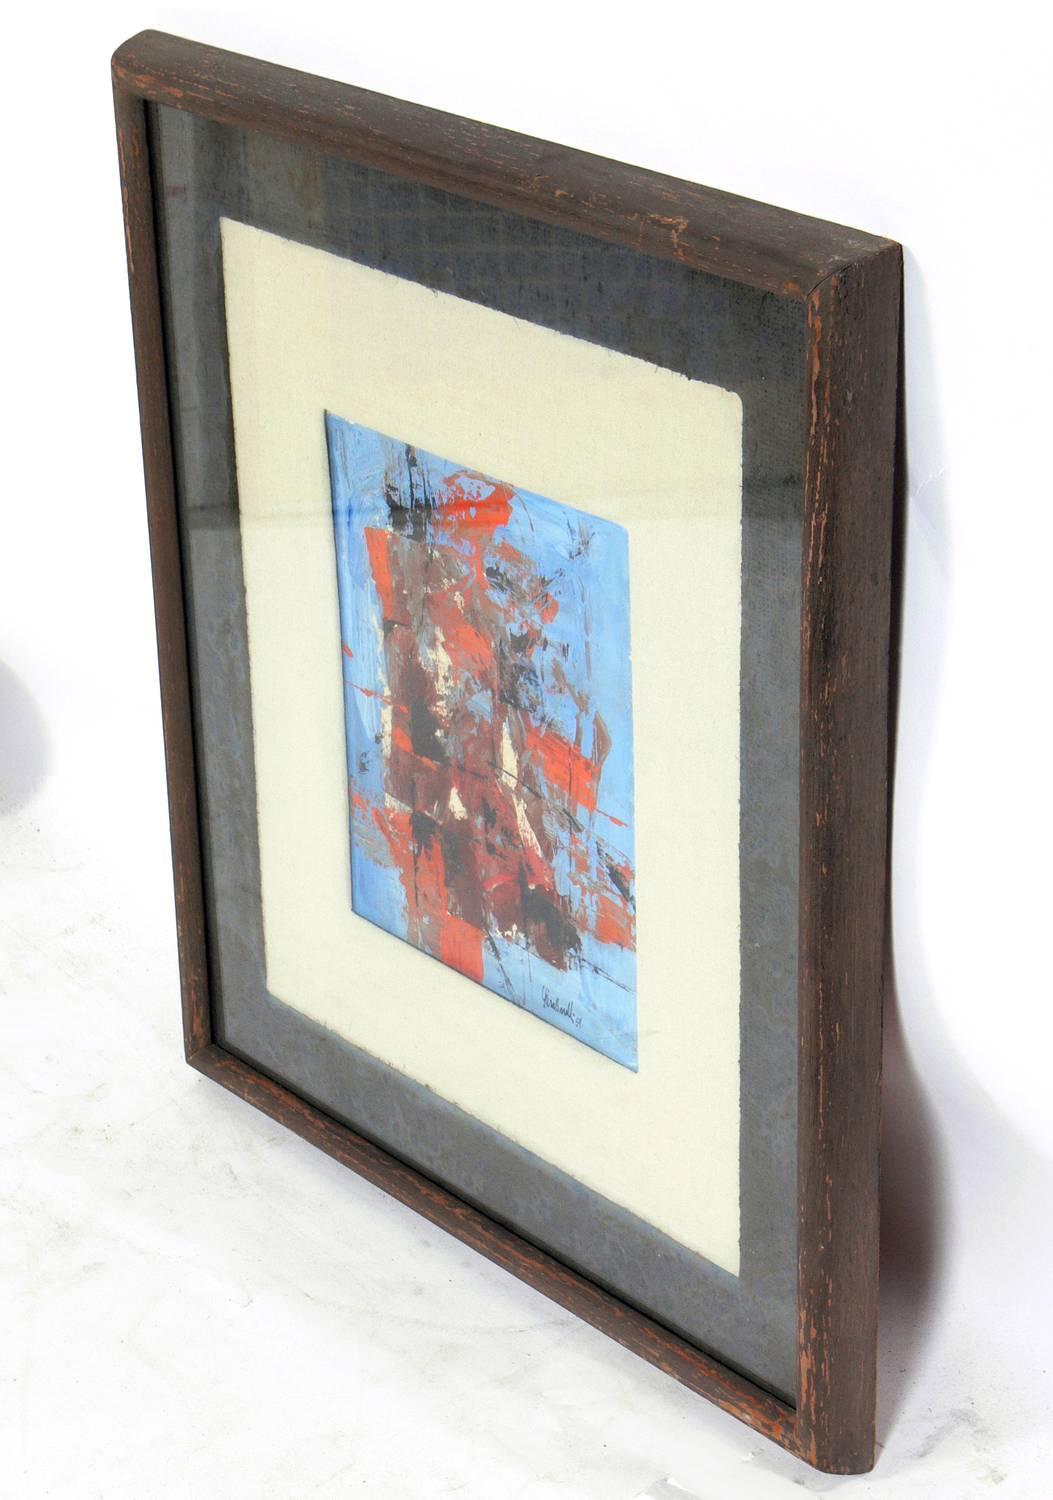 Midcentury abstract painting by Arnold Taraborrelli, American, circa 1959. It is entitled 